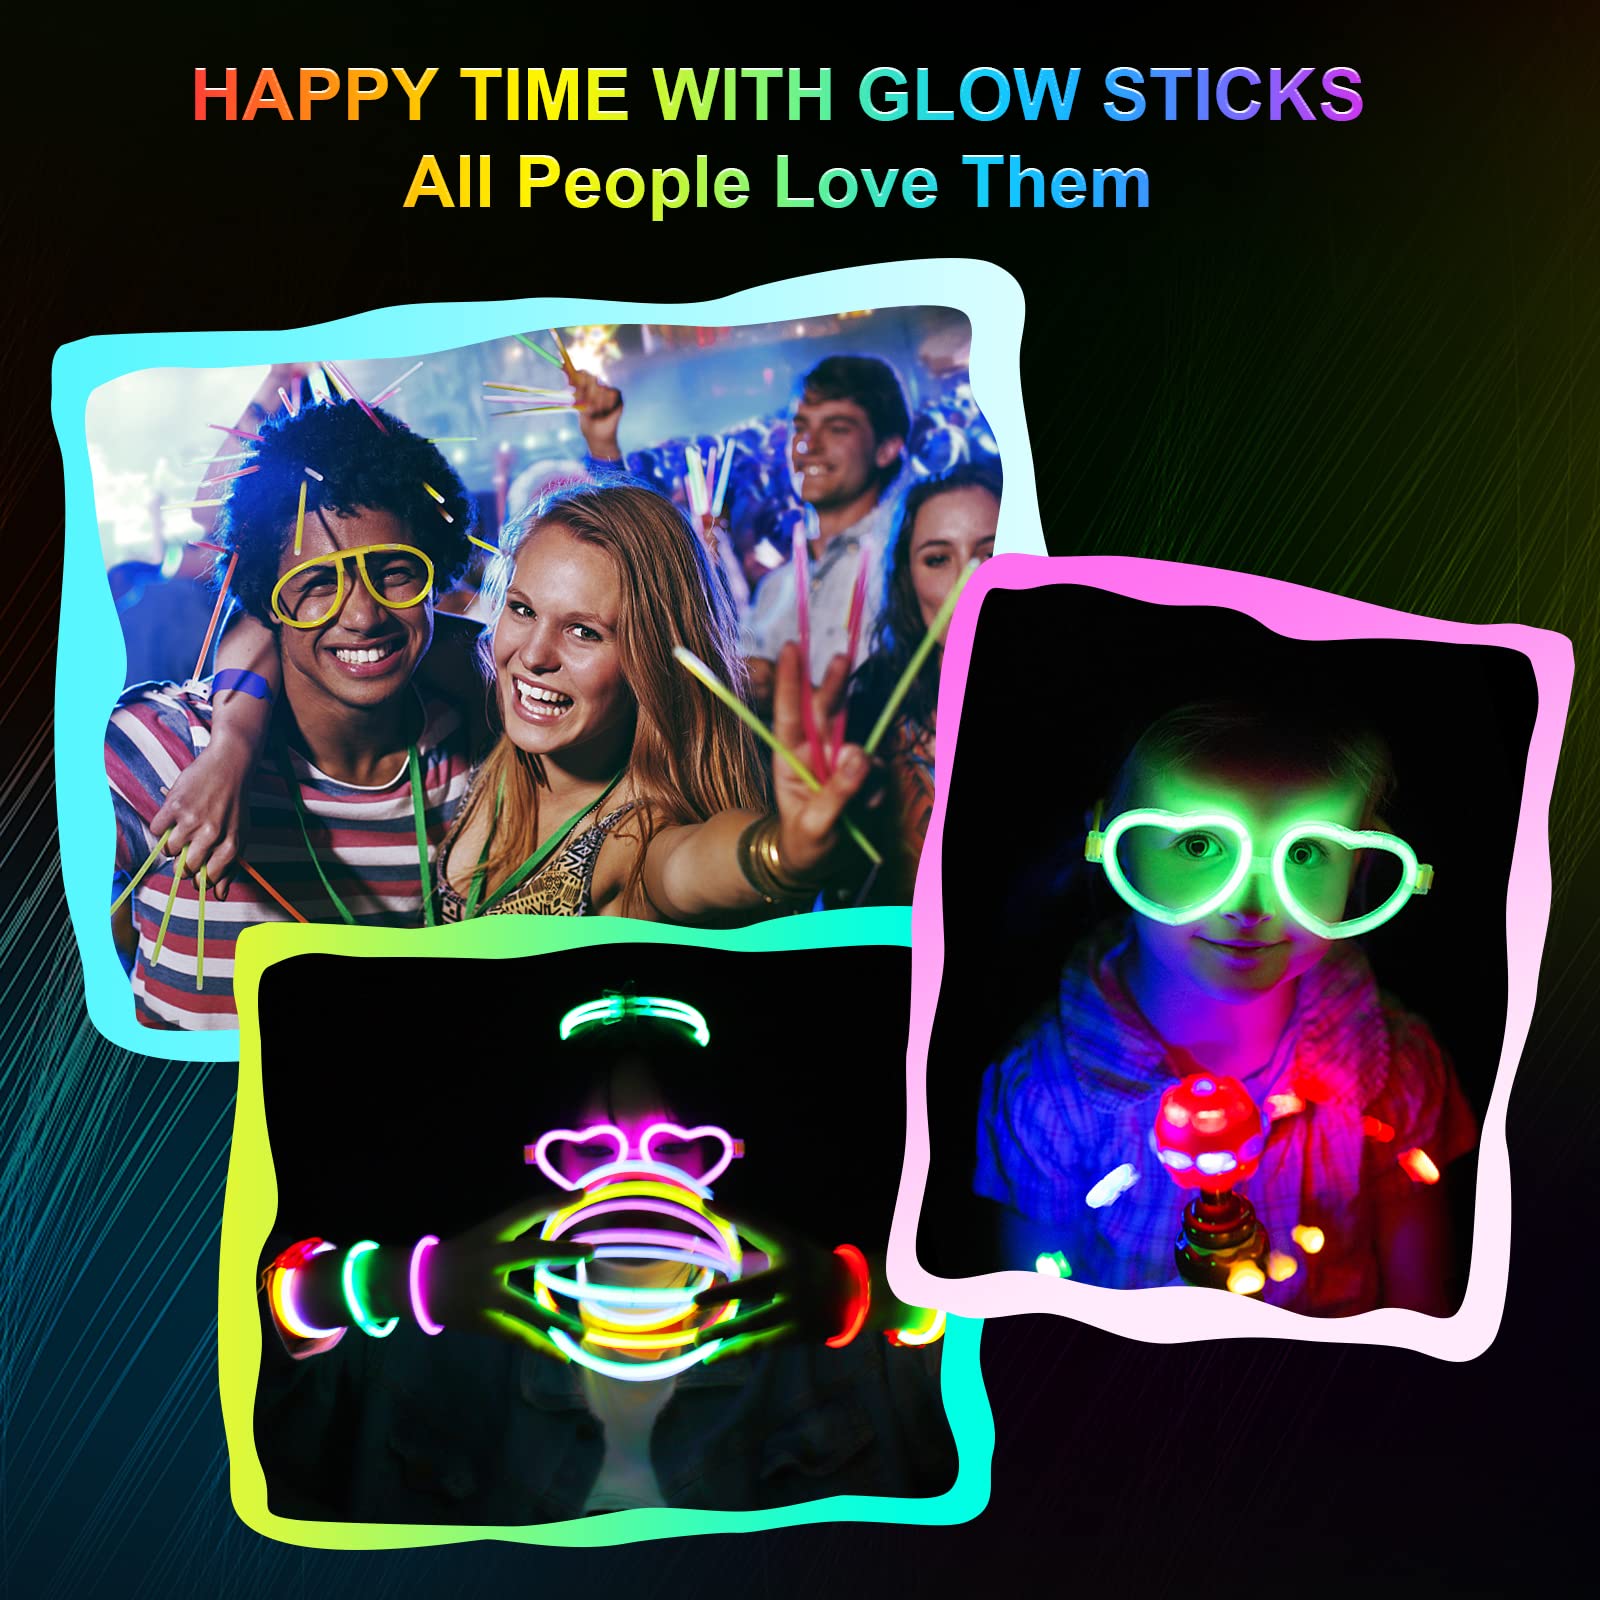 AIVANT Glow Sticks Bulk Party Supplies | 216 PCS Glow Stick Set with Connectors for Eyeglasses Hairpins Balls Butterflies | Glow in the Dark Light Up Sticks Party Favors Decorations